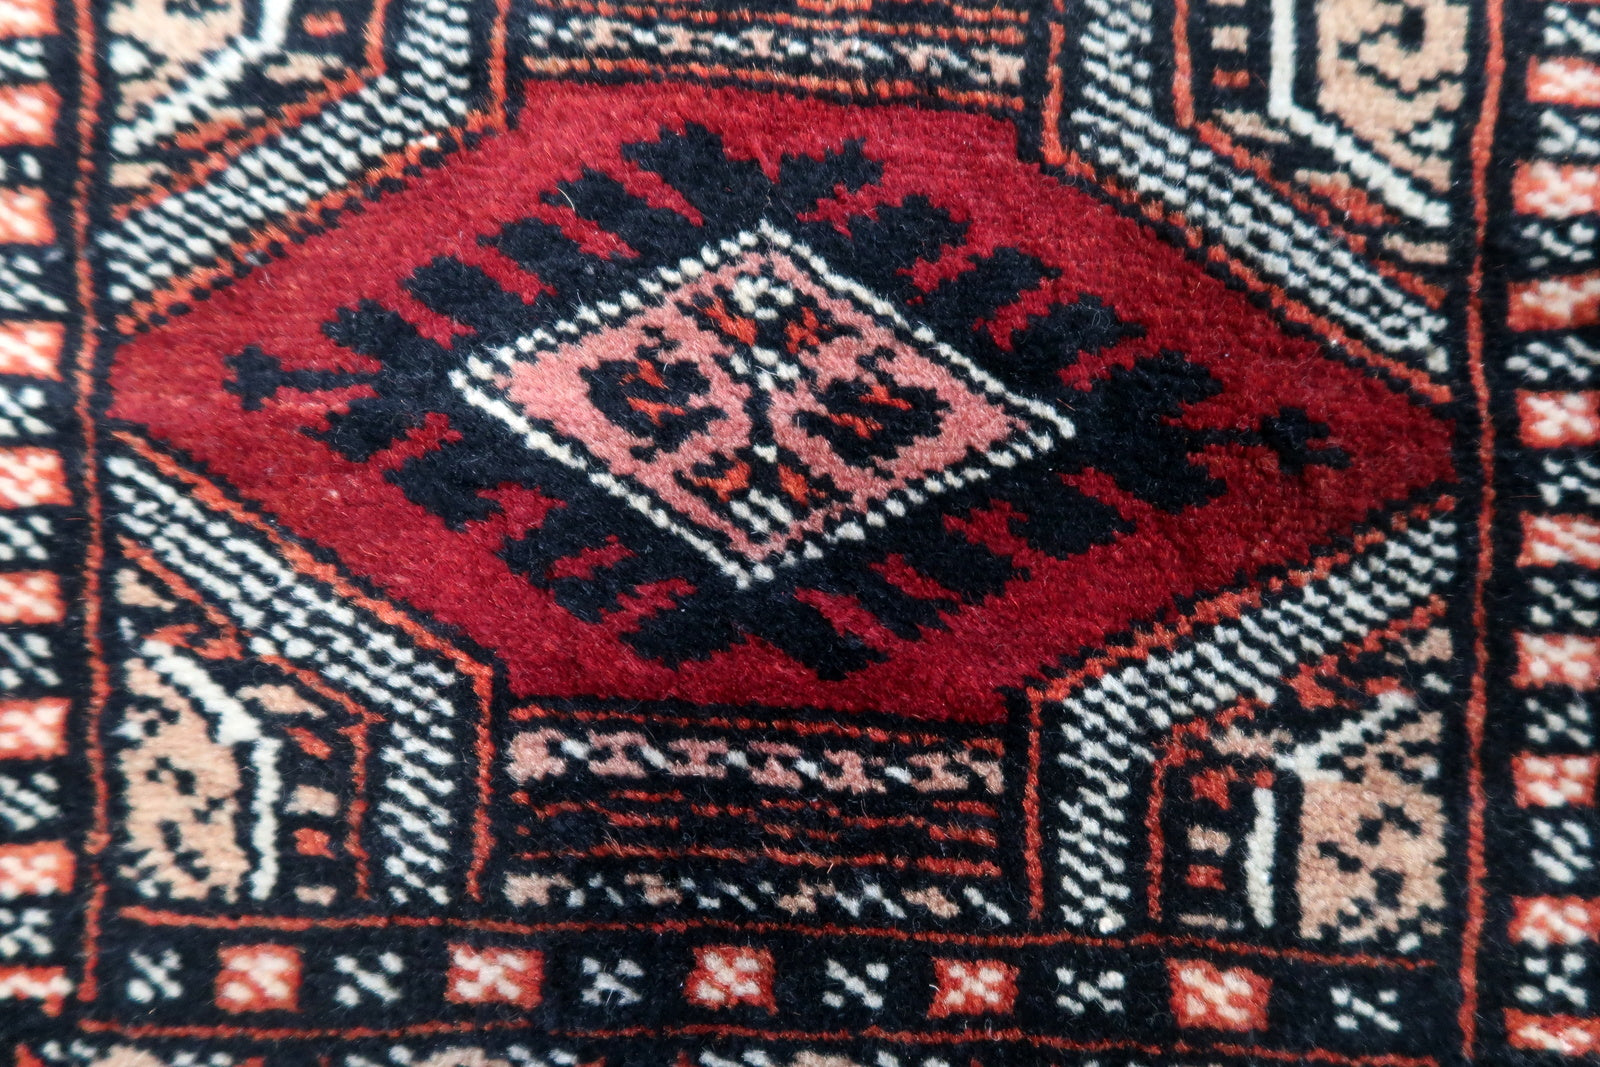 Overhead shot of the mat rug displaying its symmetrical patterns and faded colors